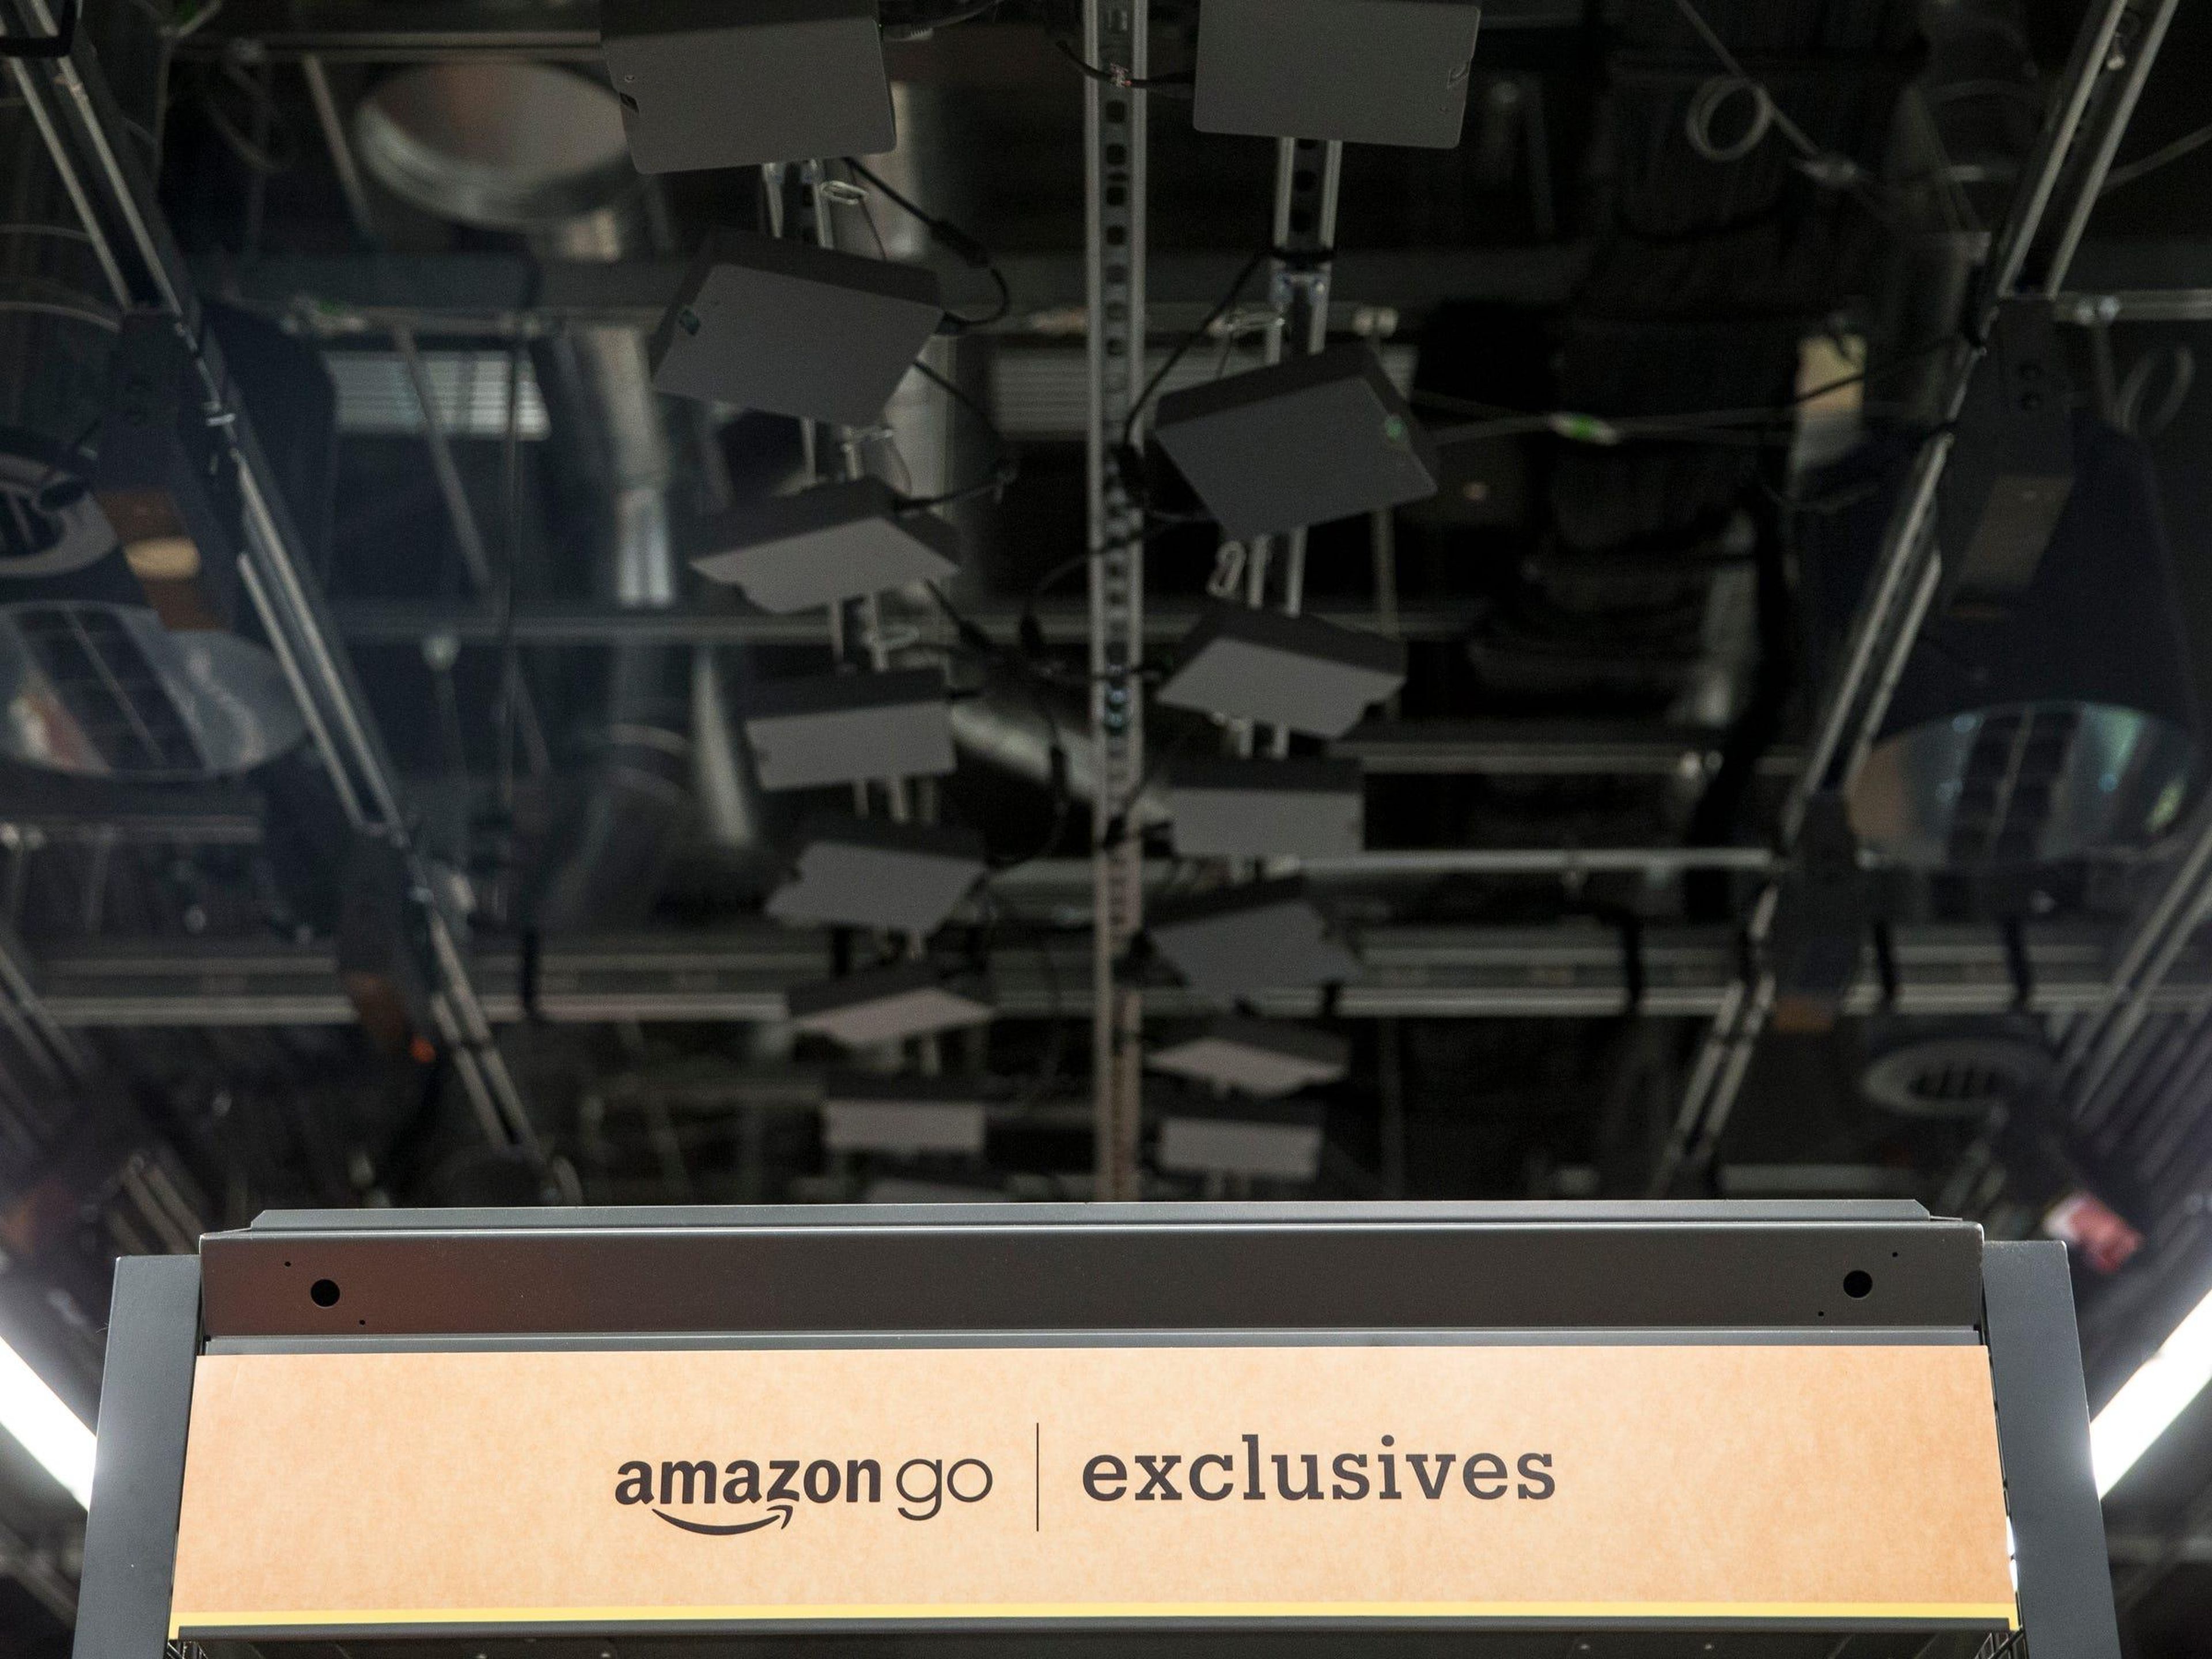 Amazon monitors customers' actions once they're inside using a complex and extensive array of cameras, sensors, and motion-detection software.